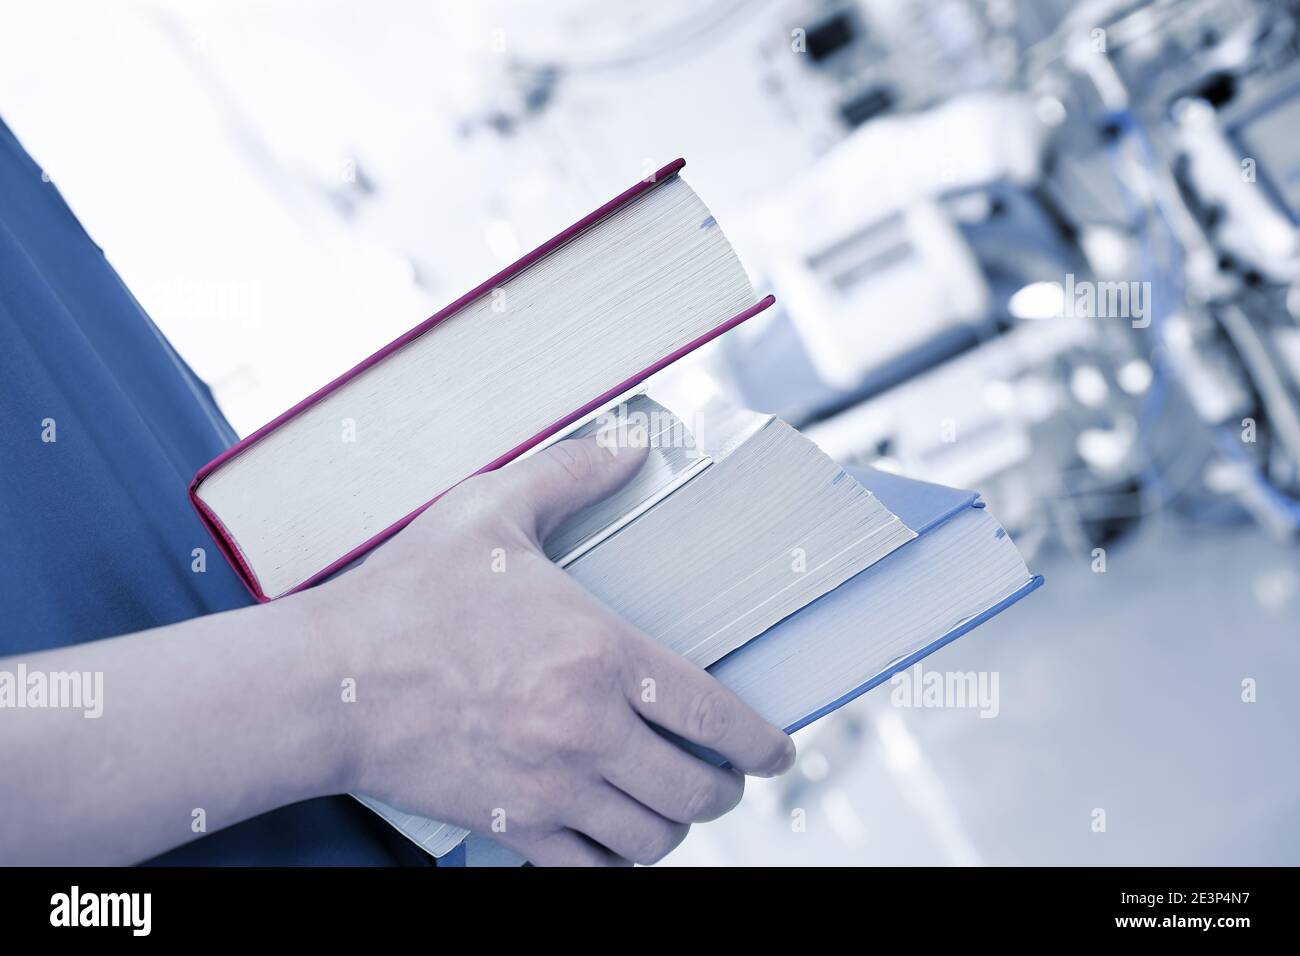 Books stacked in the hands of a young specialist in a room with equipment Stock Photo